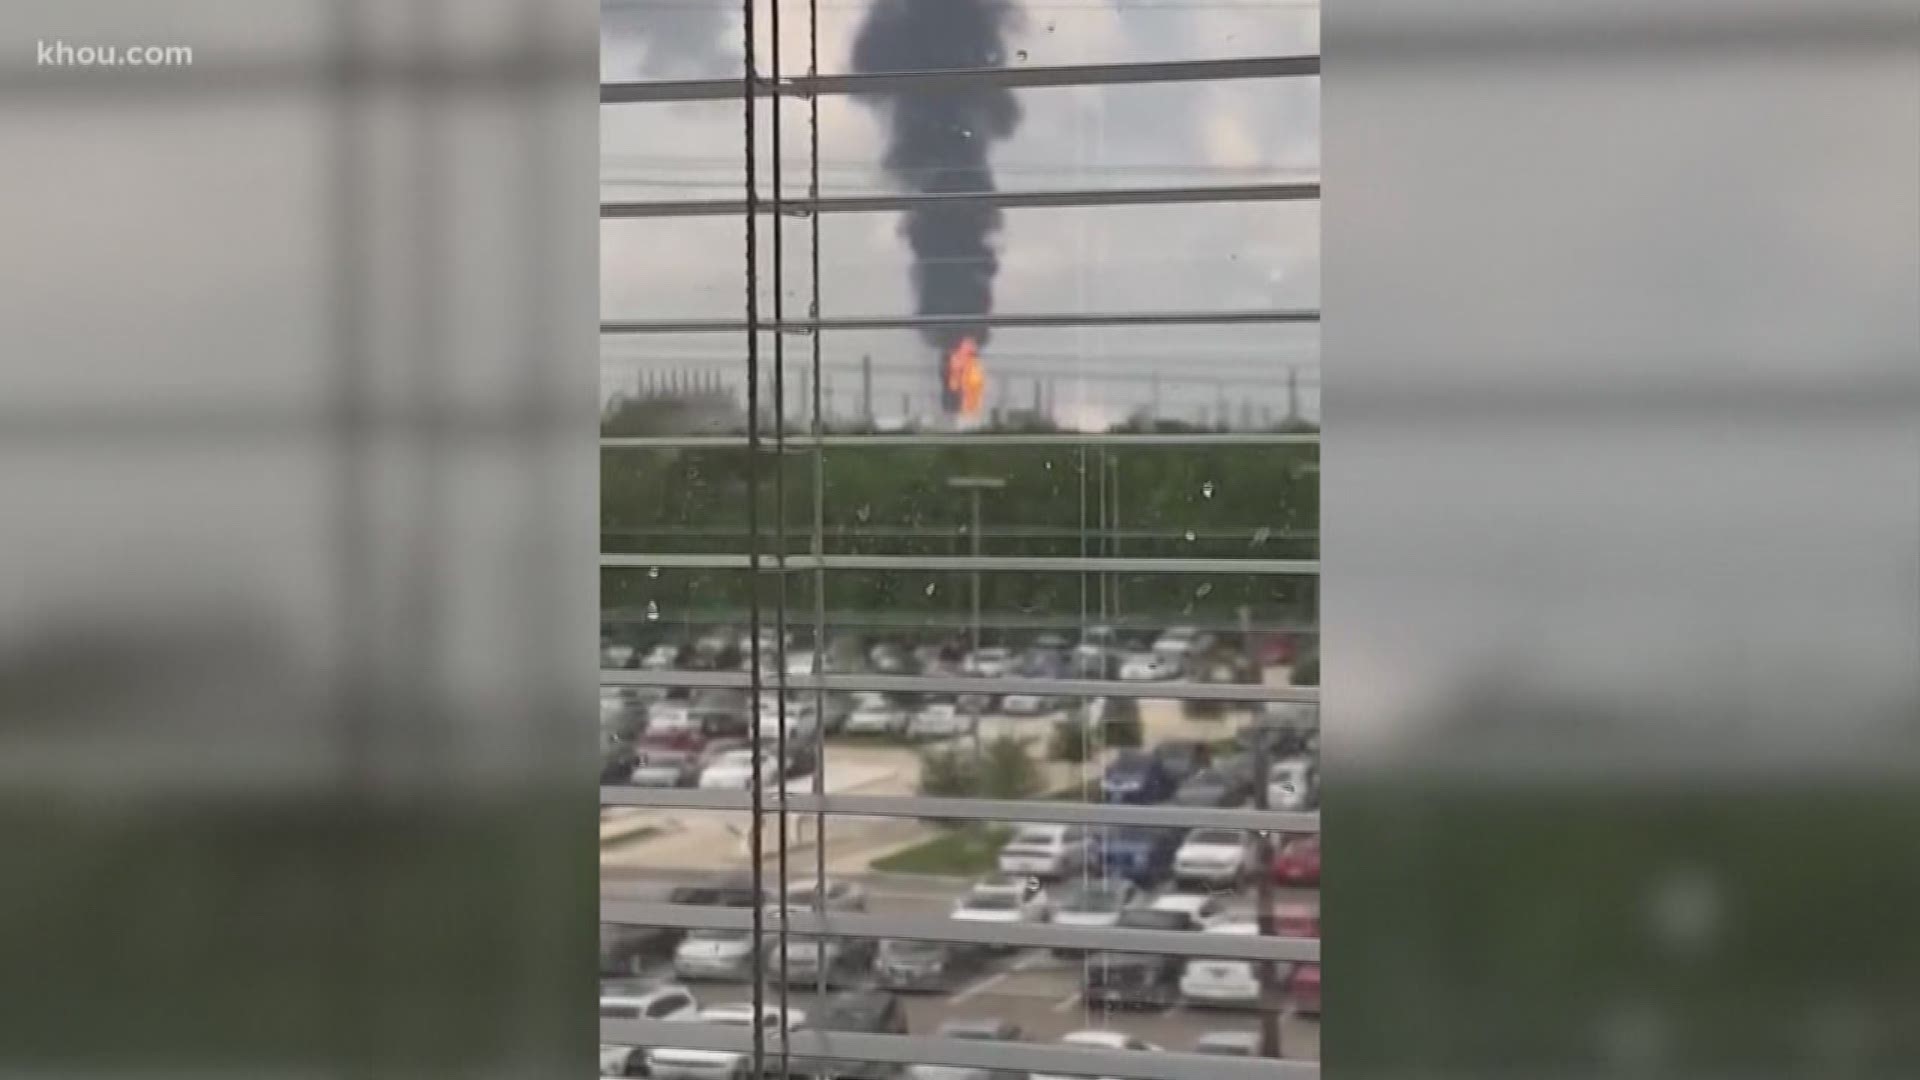 After the fourth major chemical plant fire since January, Harris County leaders said they know change needs to happen and they are focused on prevention.